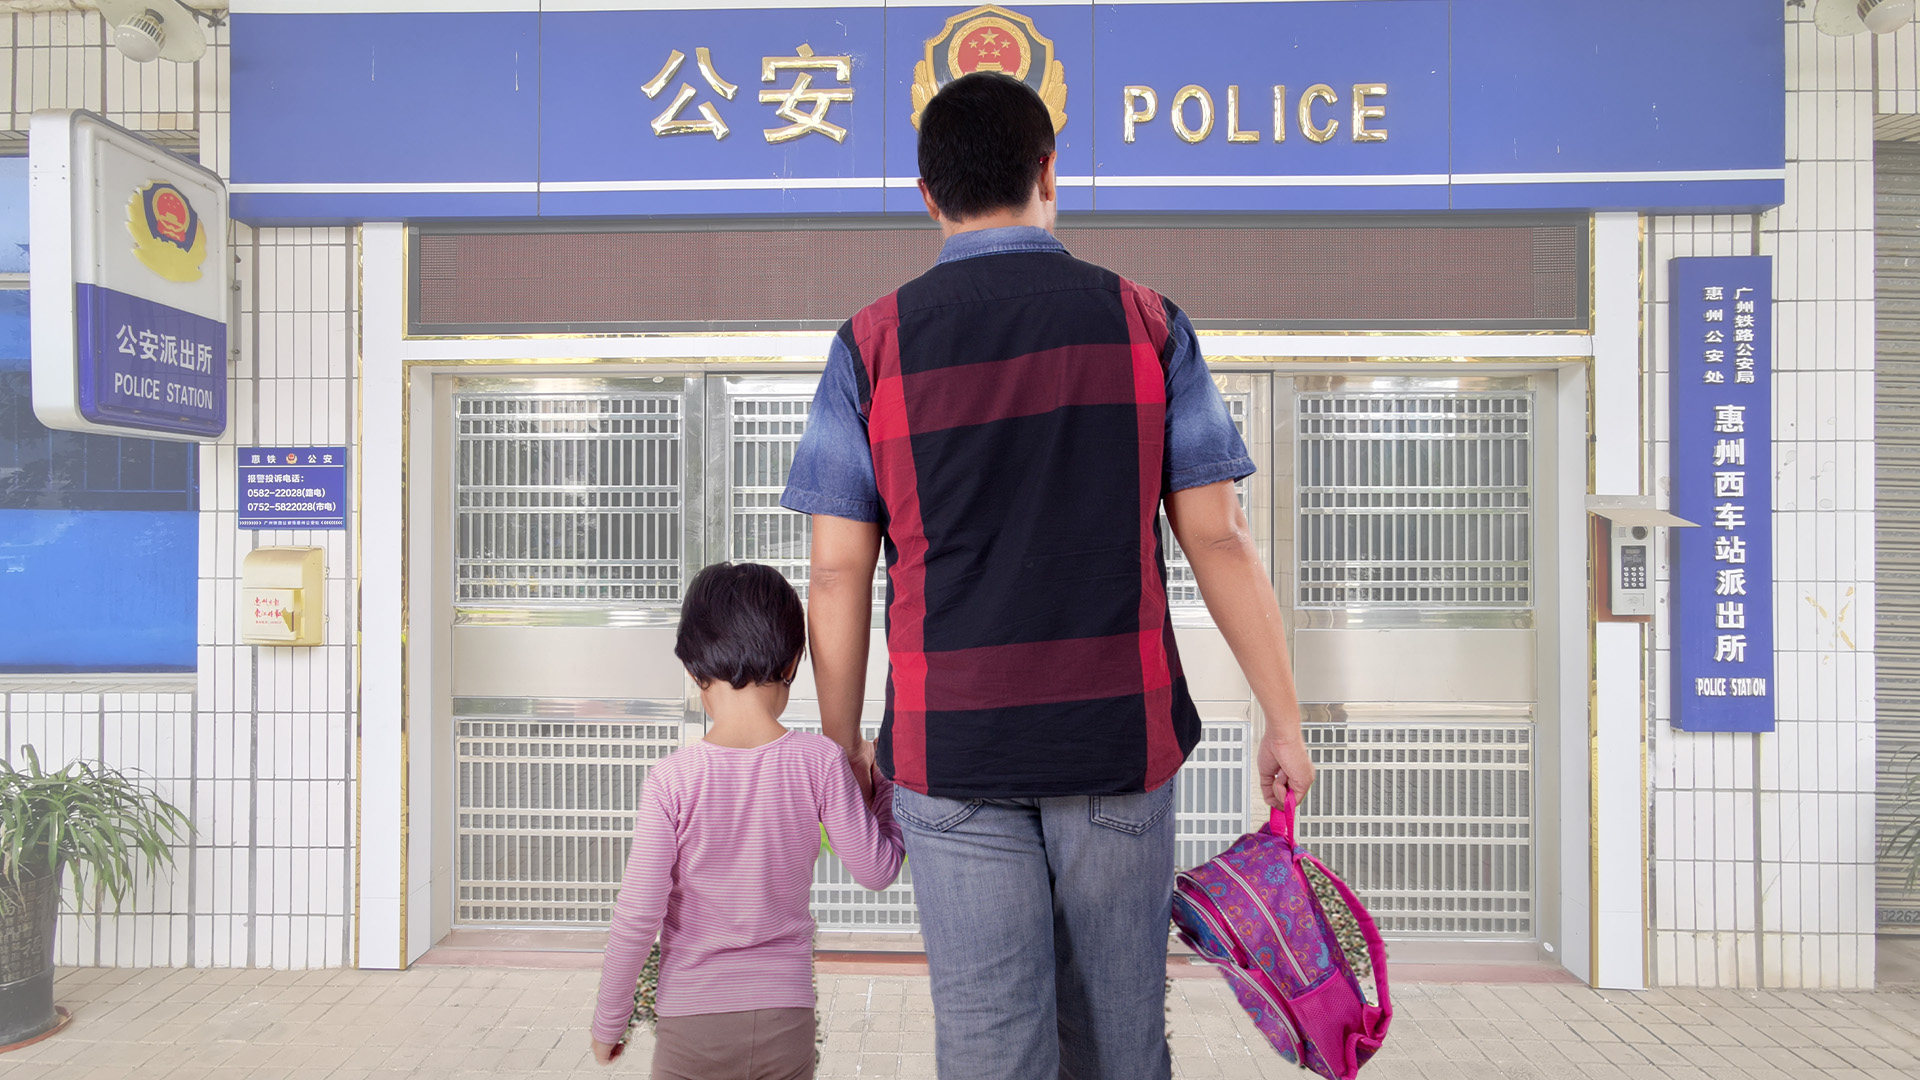 Li faked the paternity test result to try to register the girl as his daughter but household registration officers noticed traces of tampering and reported the case to police. Photo: SCMP composite/Shutterstock